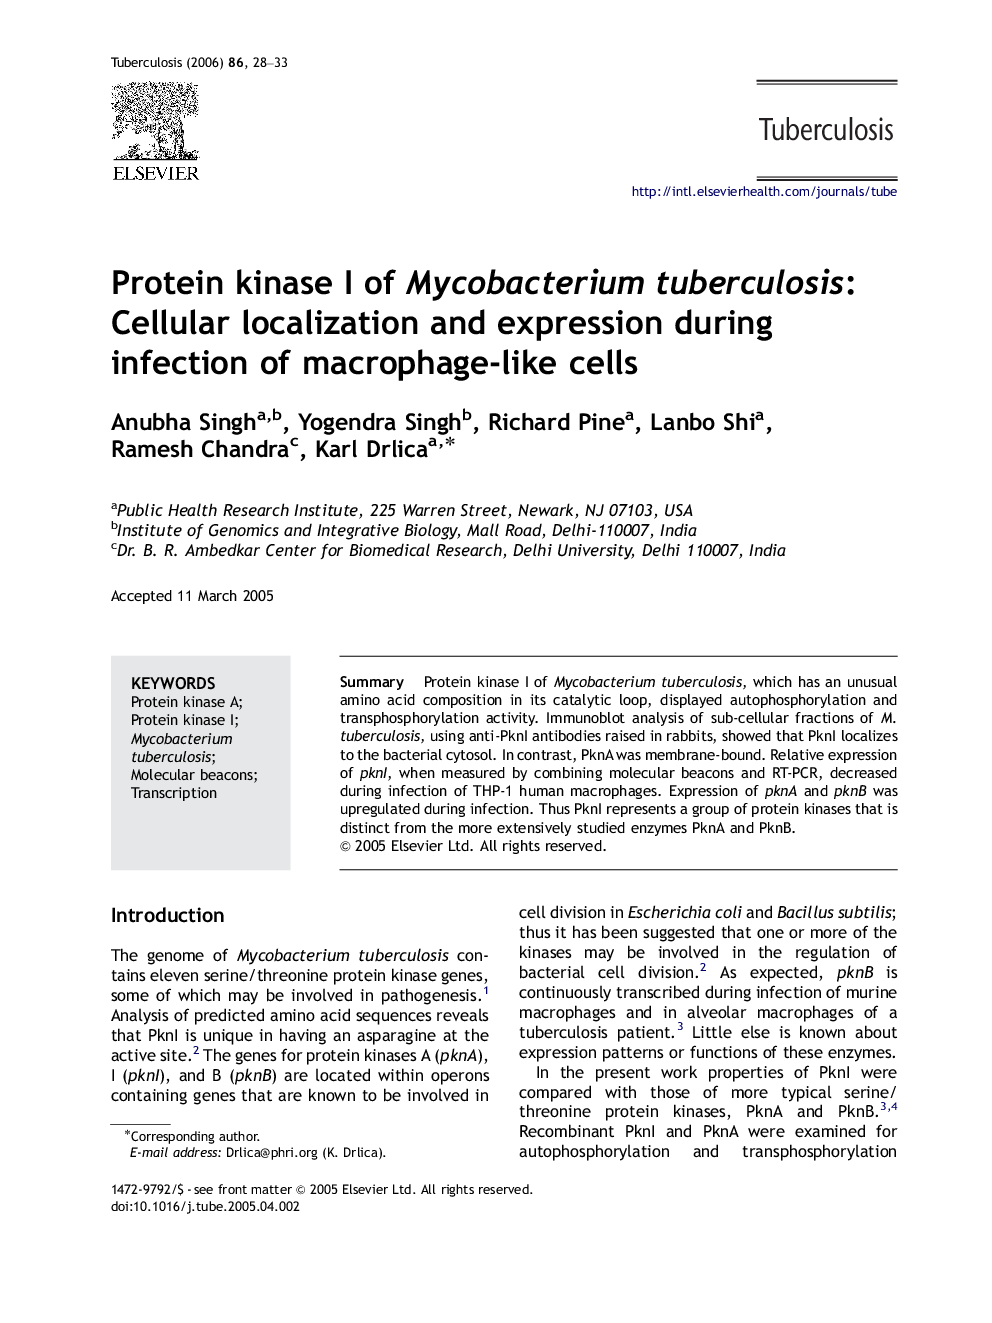 Protein kinase I of Mycobacterium tuberculosis: Cellular localization and expression during infection of macrophage-like cells